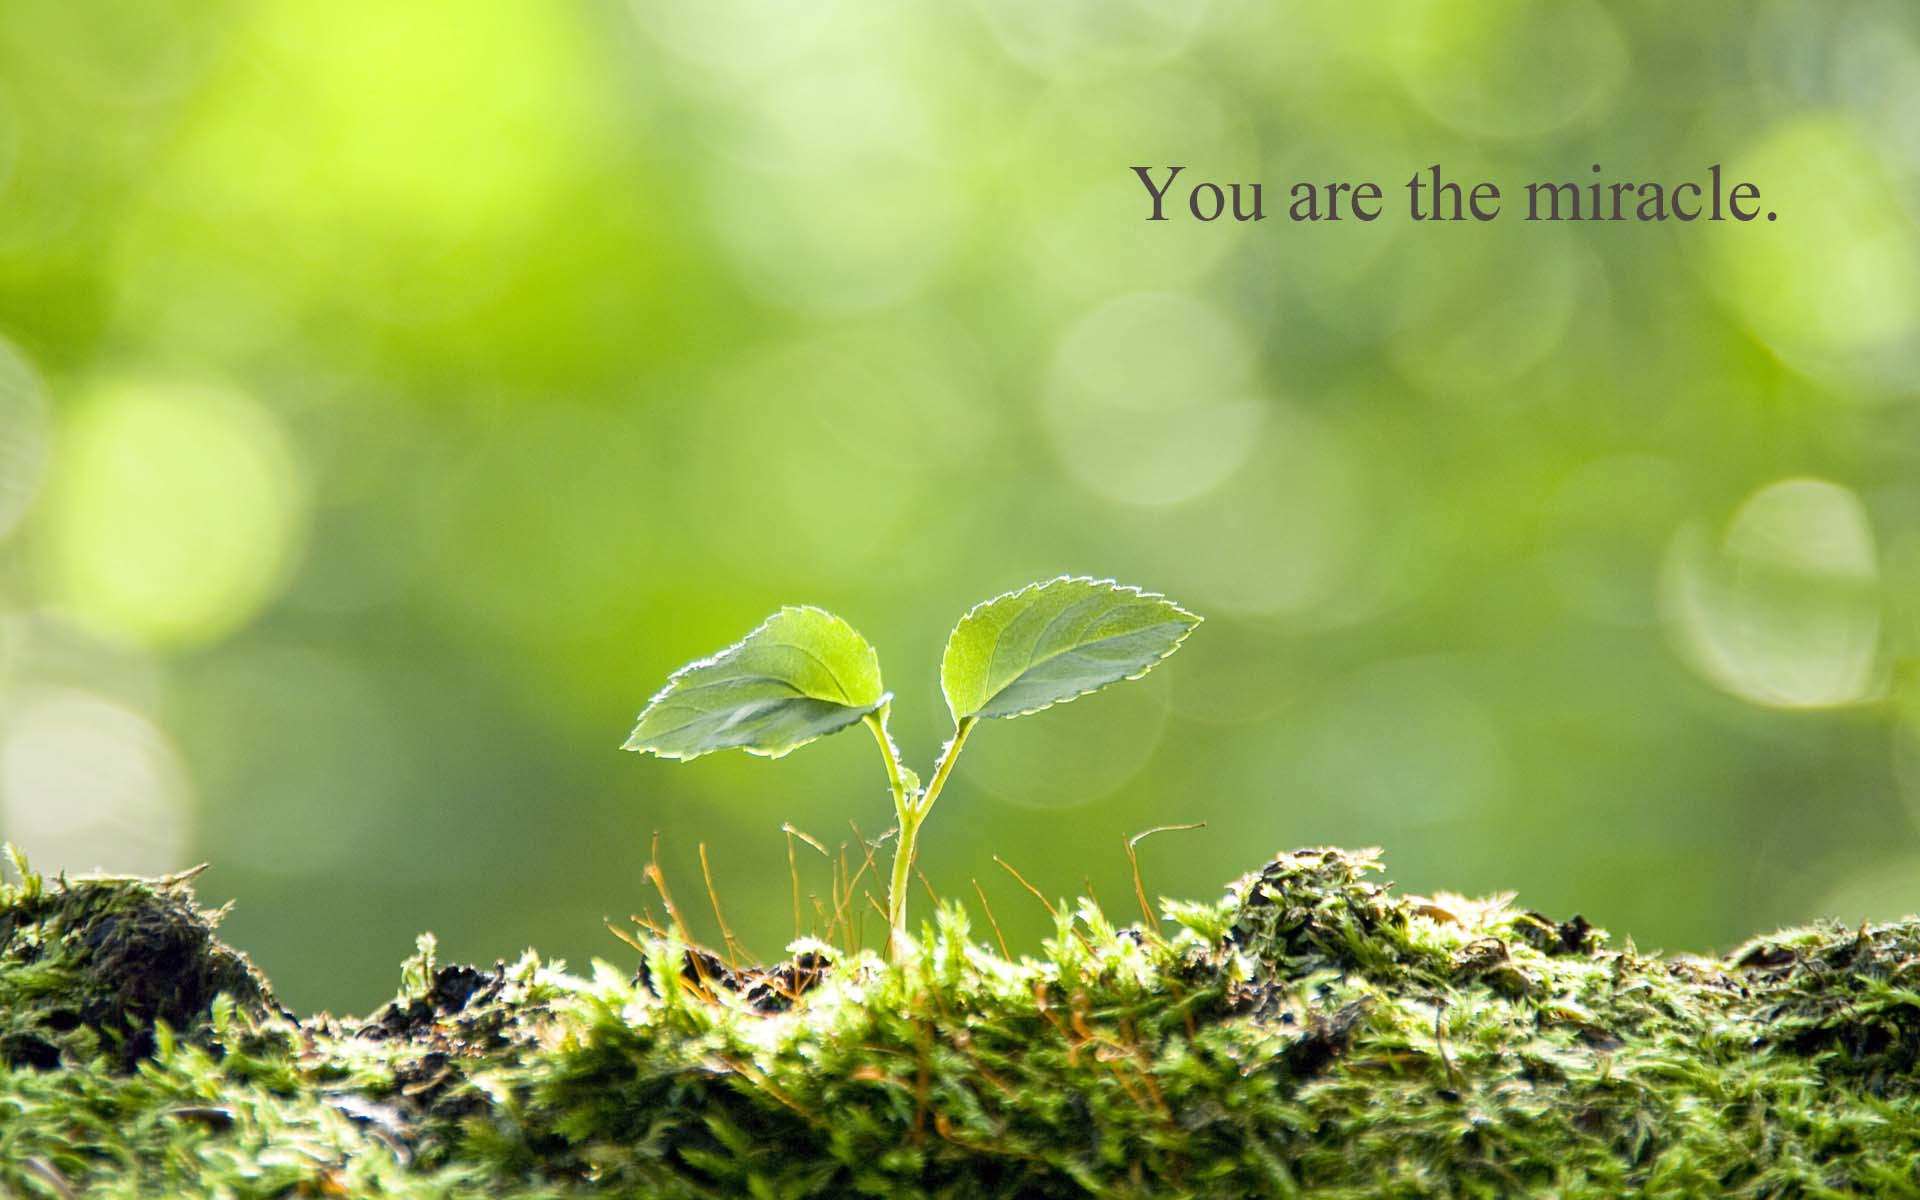 You are the Miracle